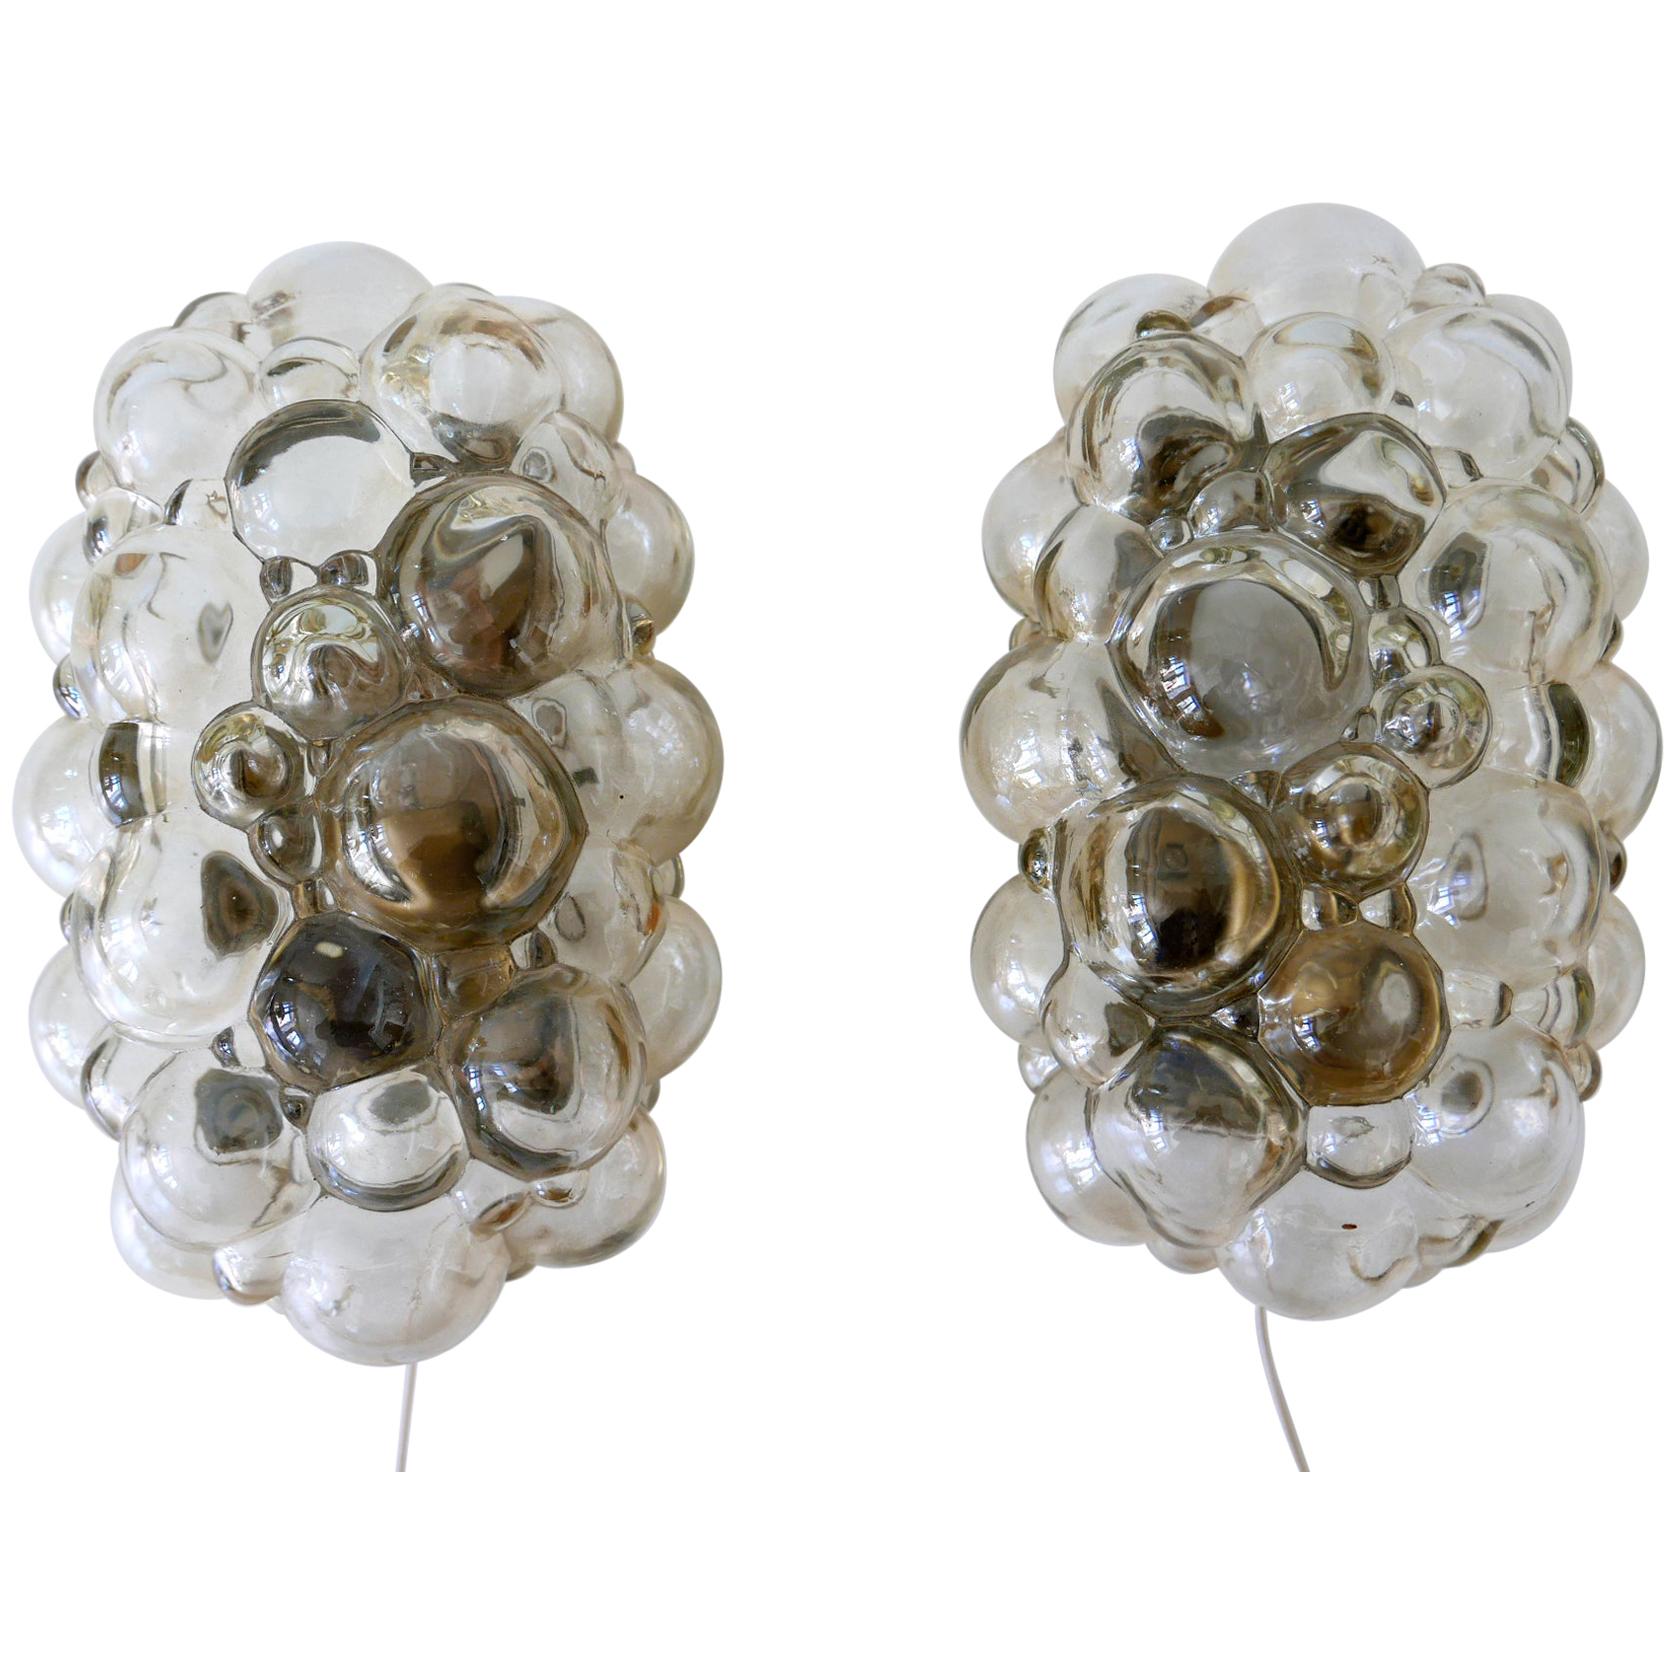 Set of Two Wall Lamps or Sconces by Helena Tynell for Glashütte Limburg, 1950s